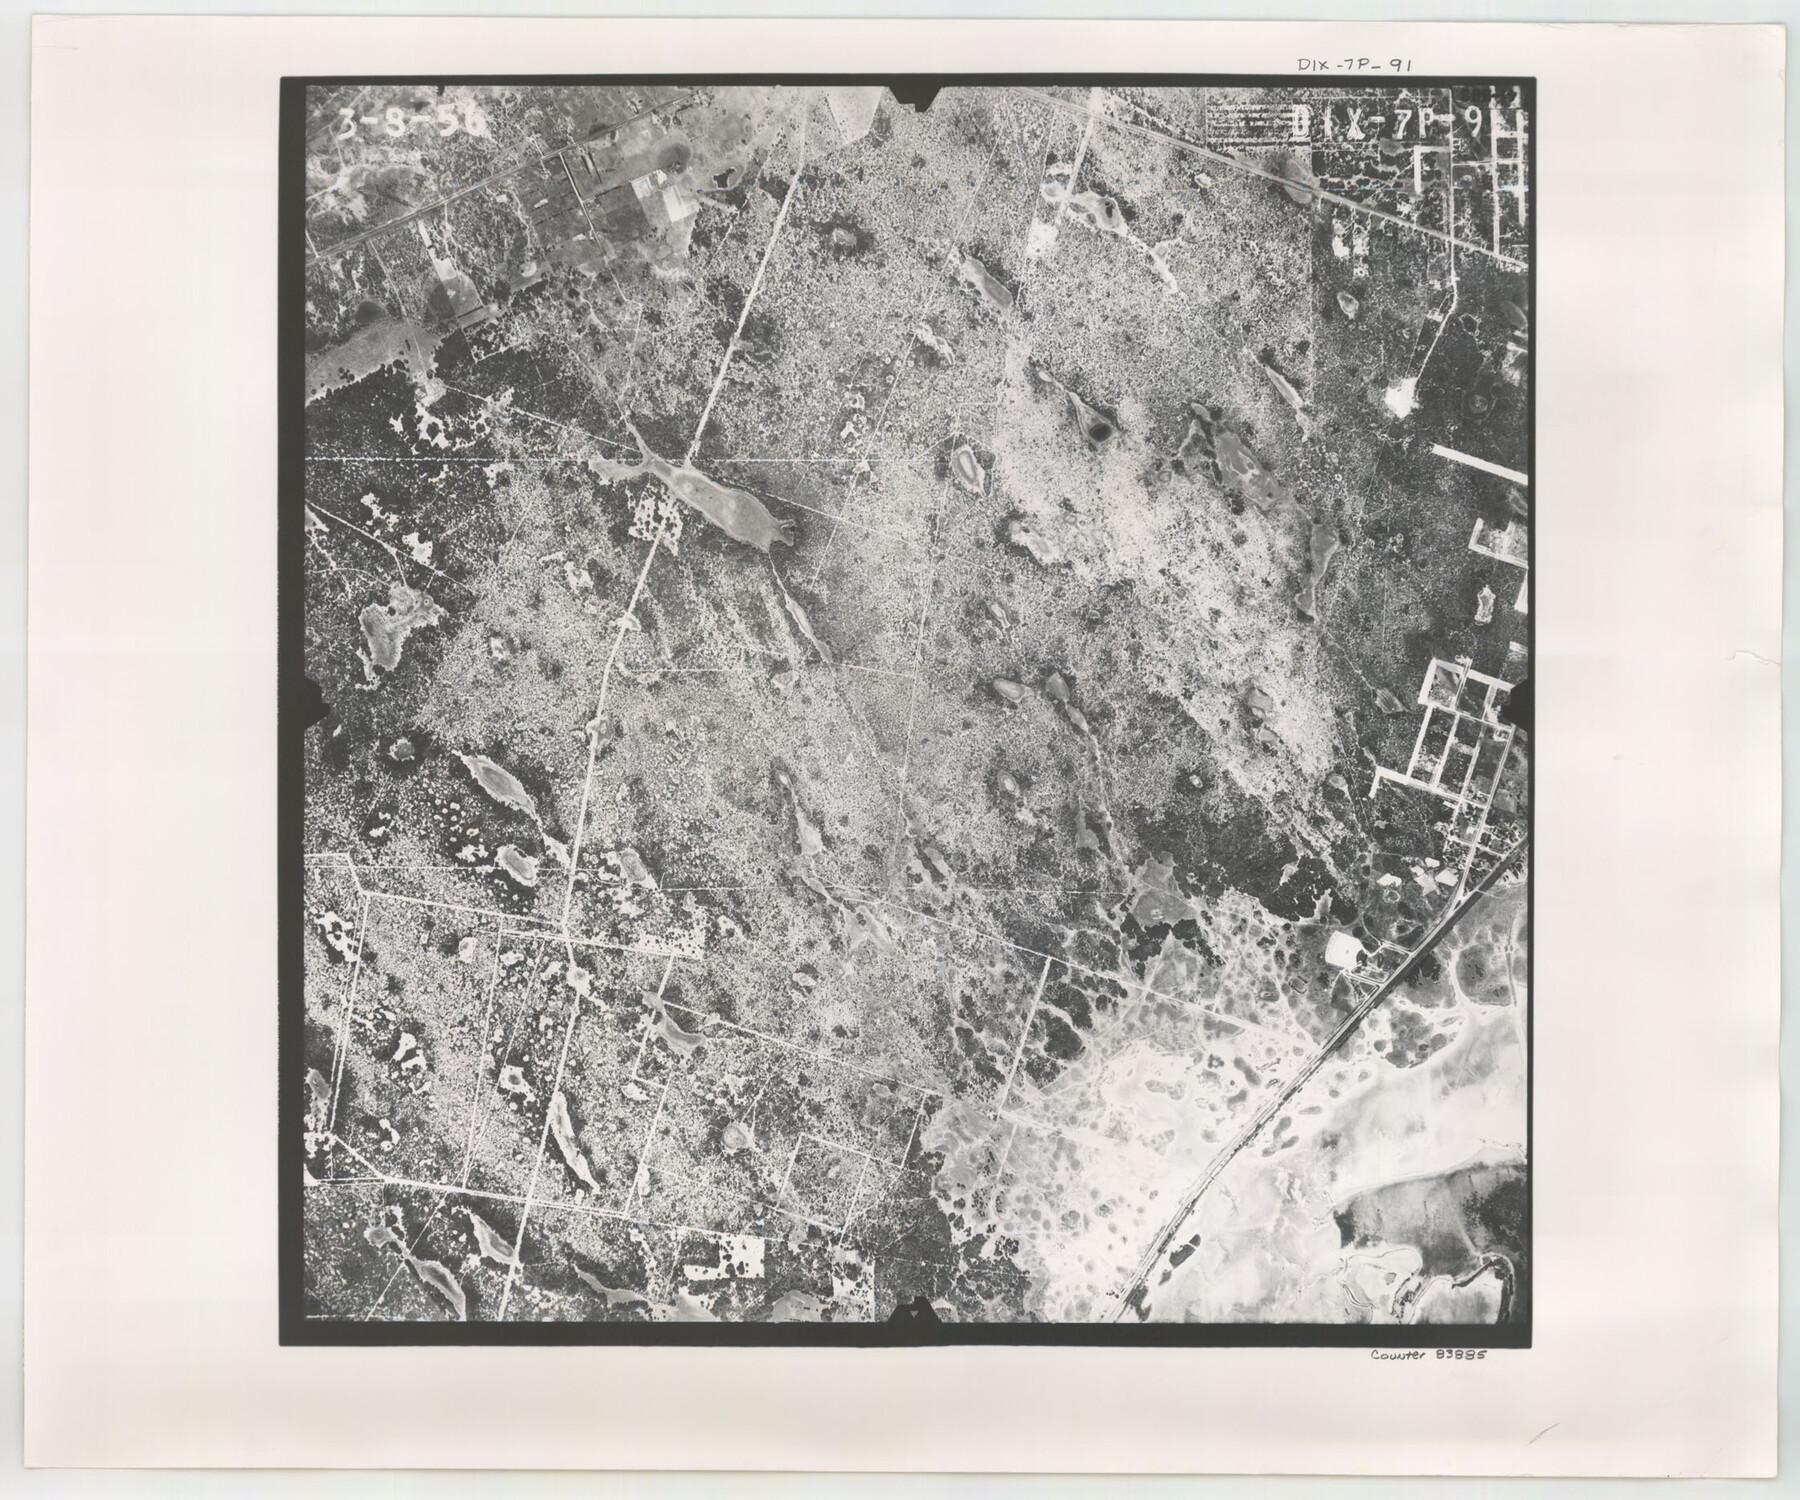 83885, Flight Mission No. DIX-7P, Frame 91, Aransas County, General Map Collection